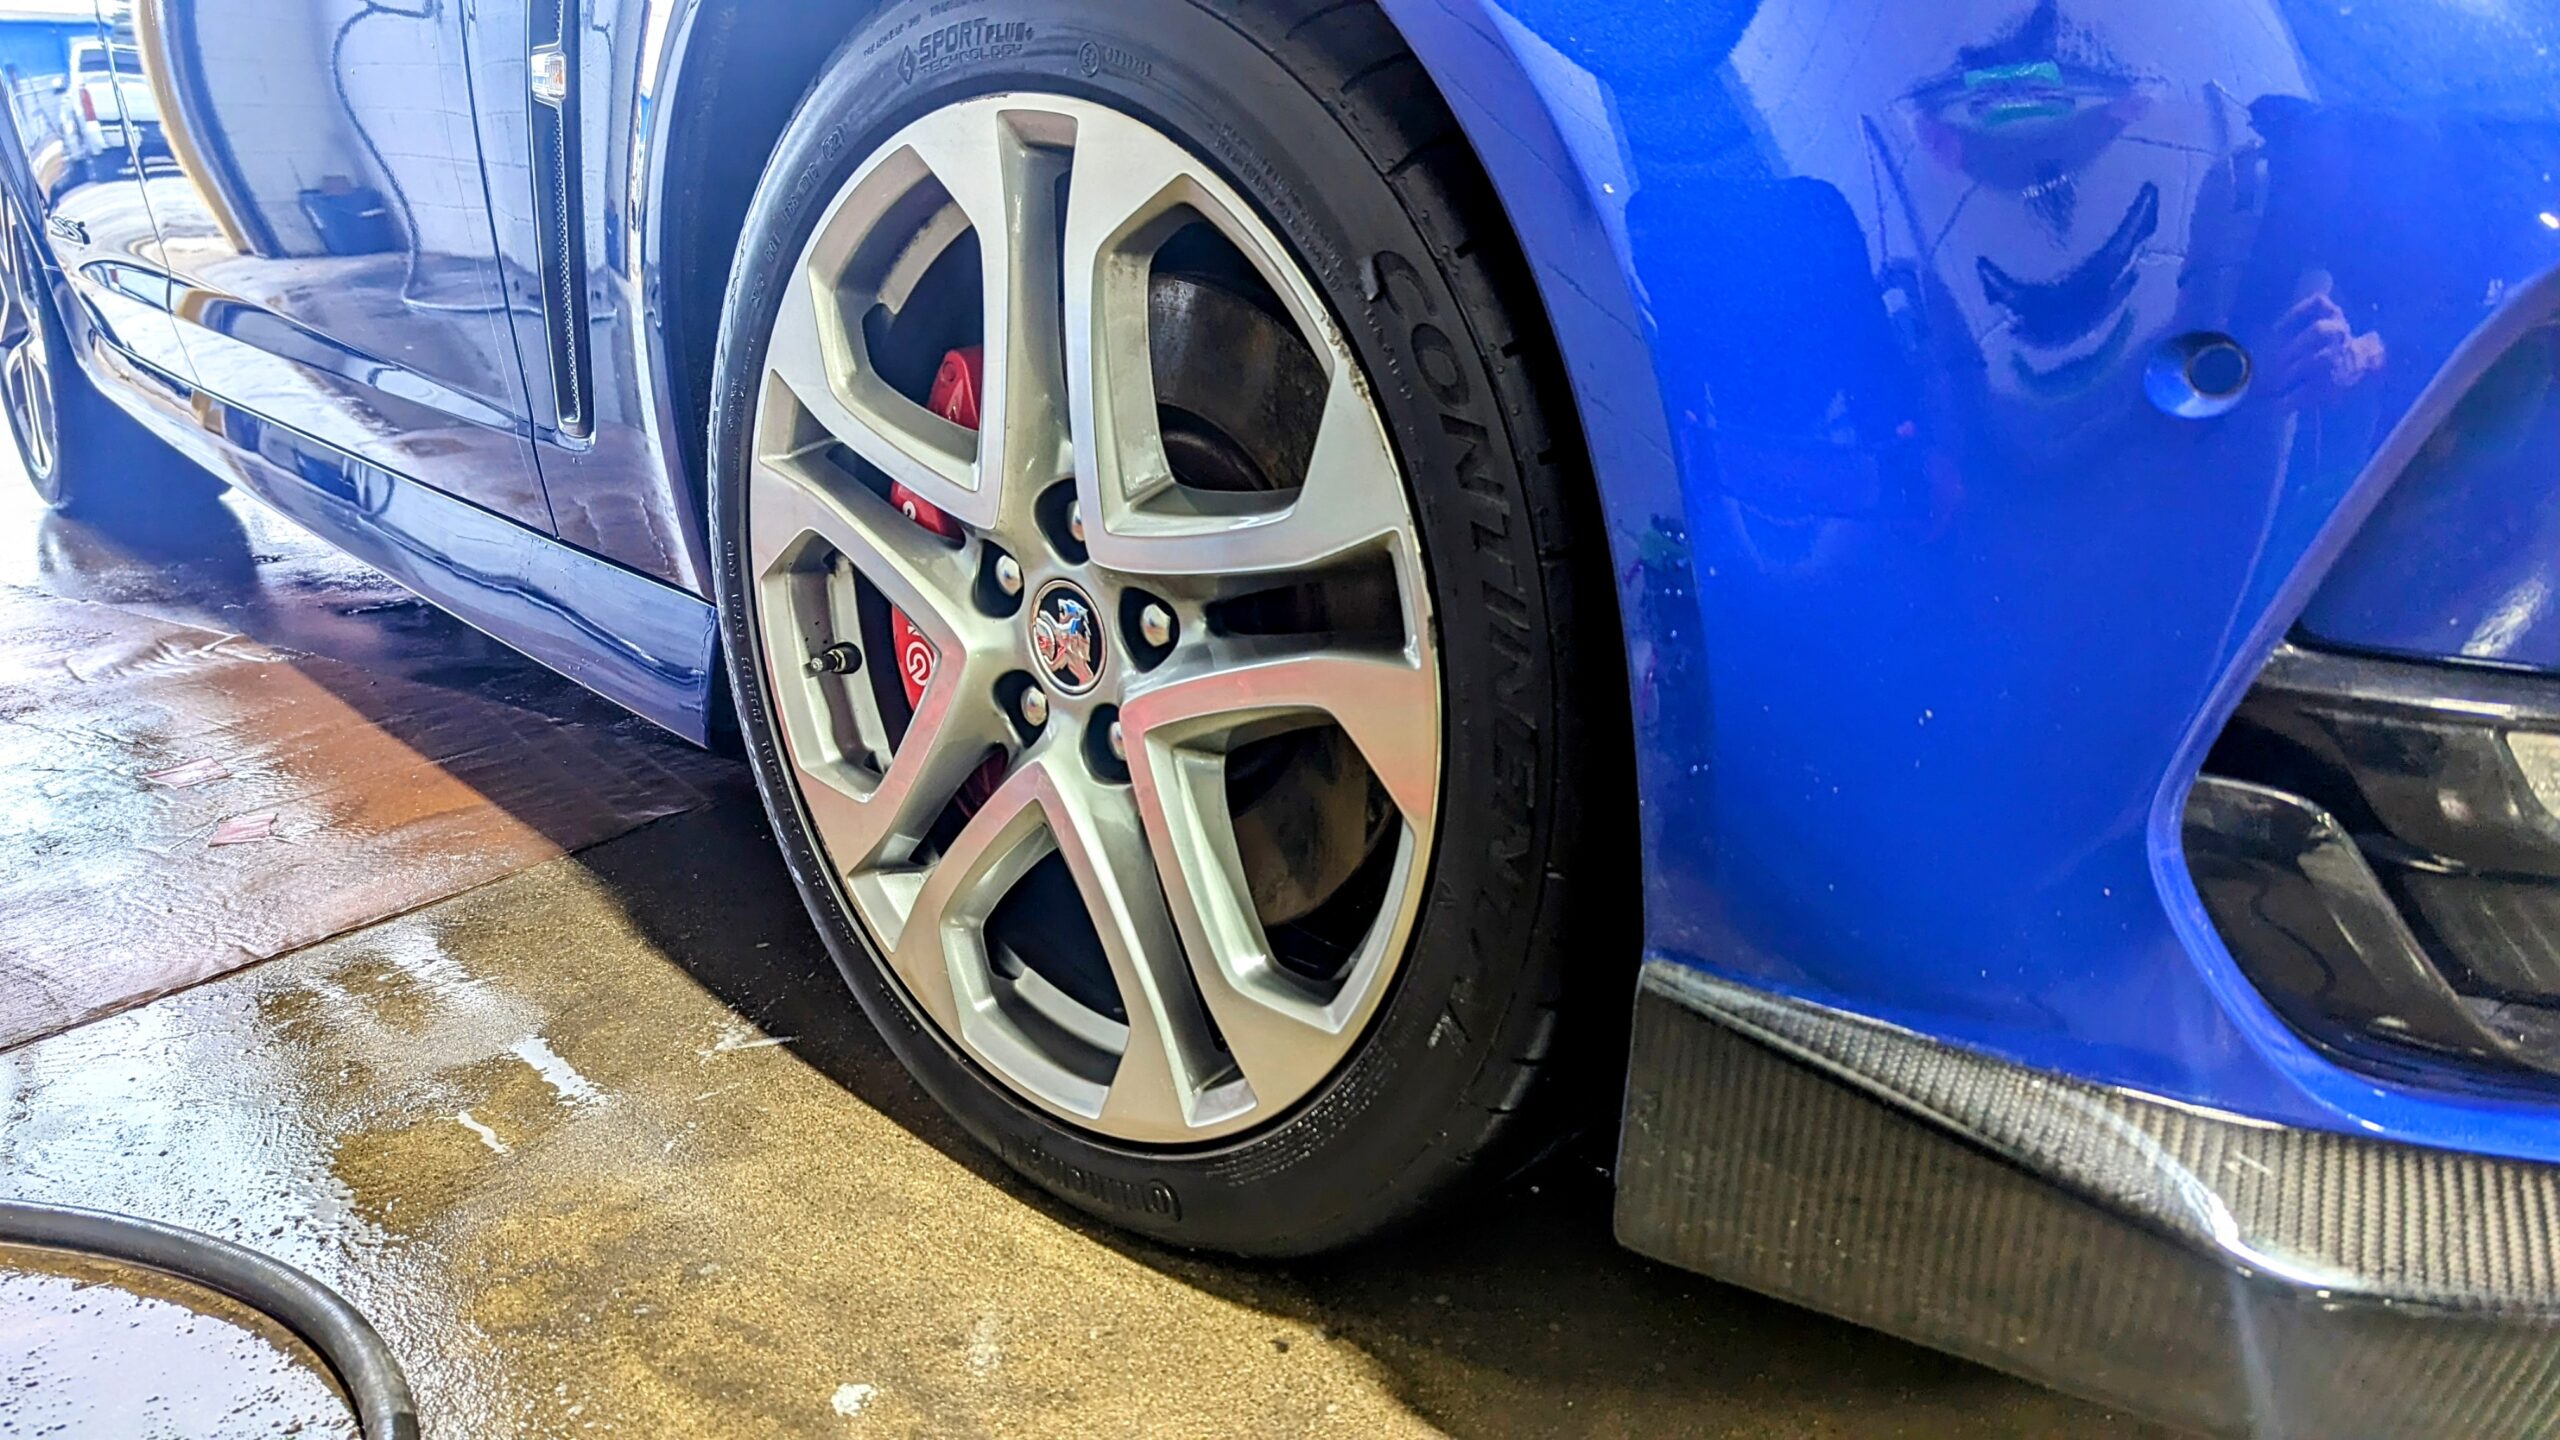 Ceramic Coating on Wheel After Removing Brake Dust with Iron Remover